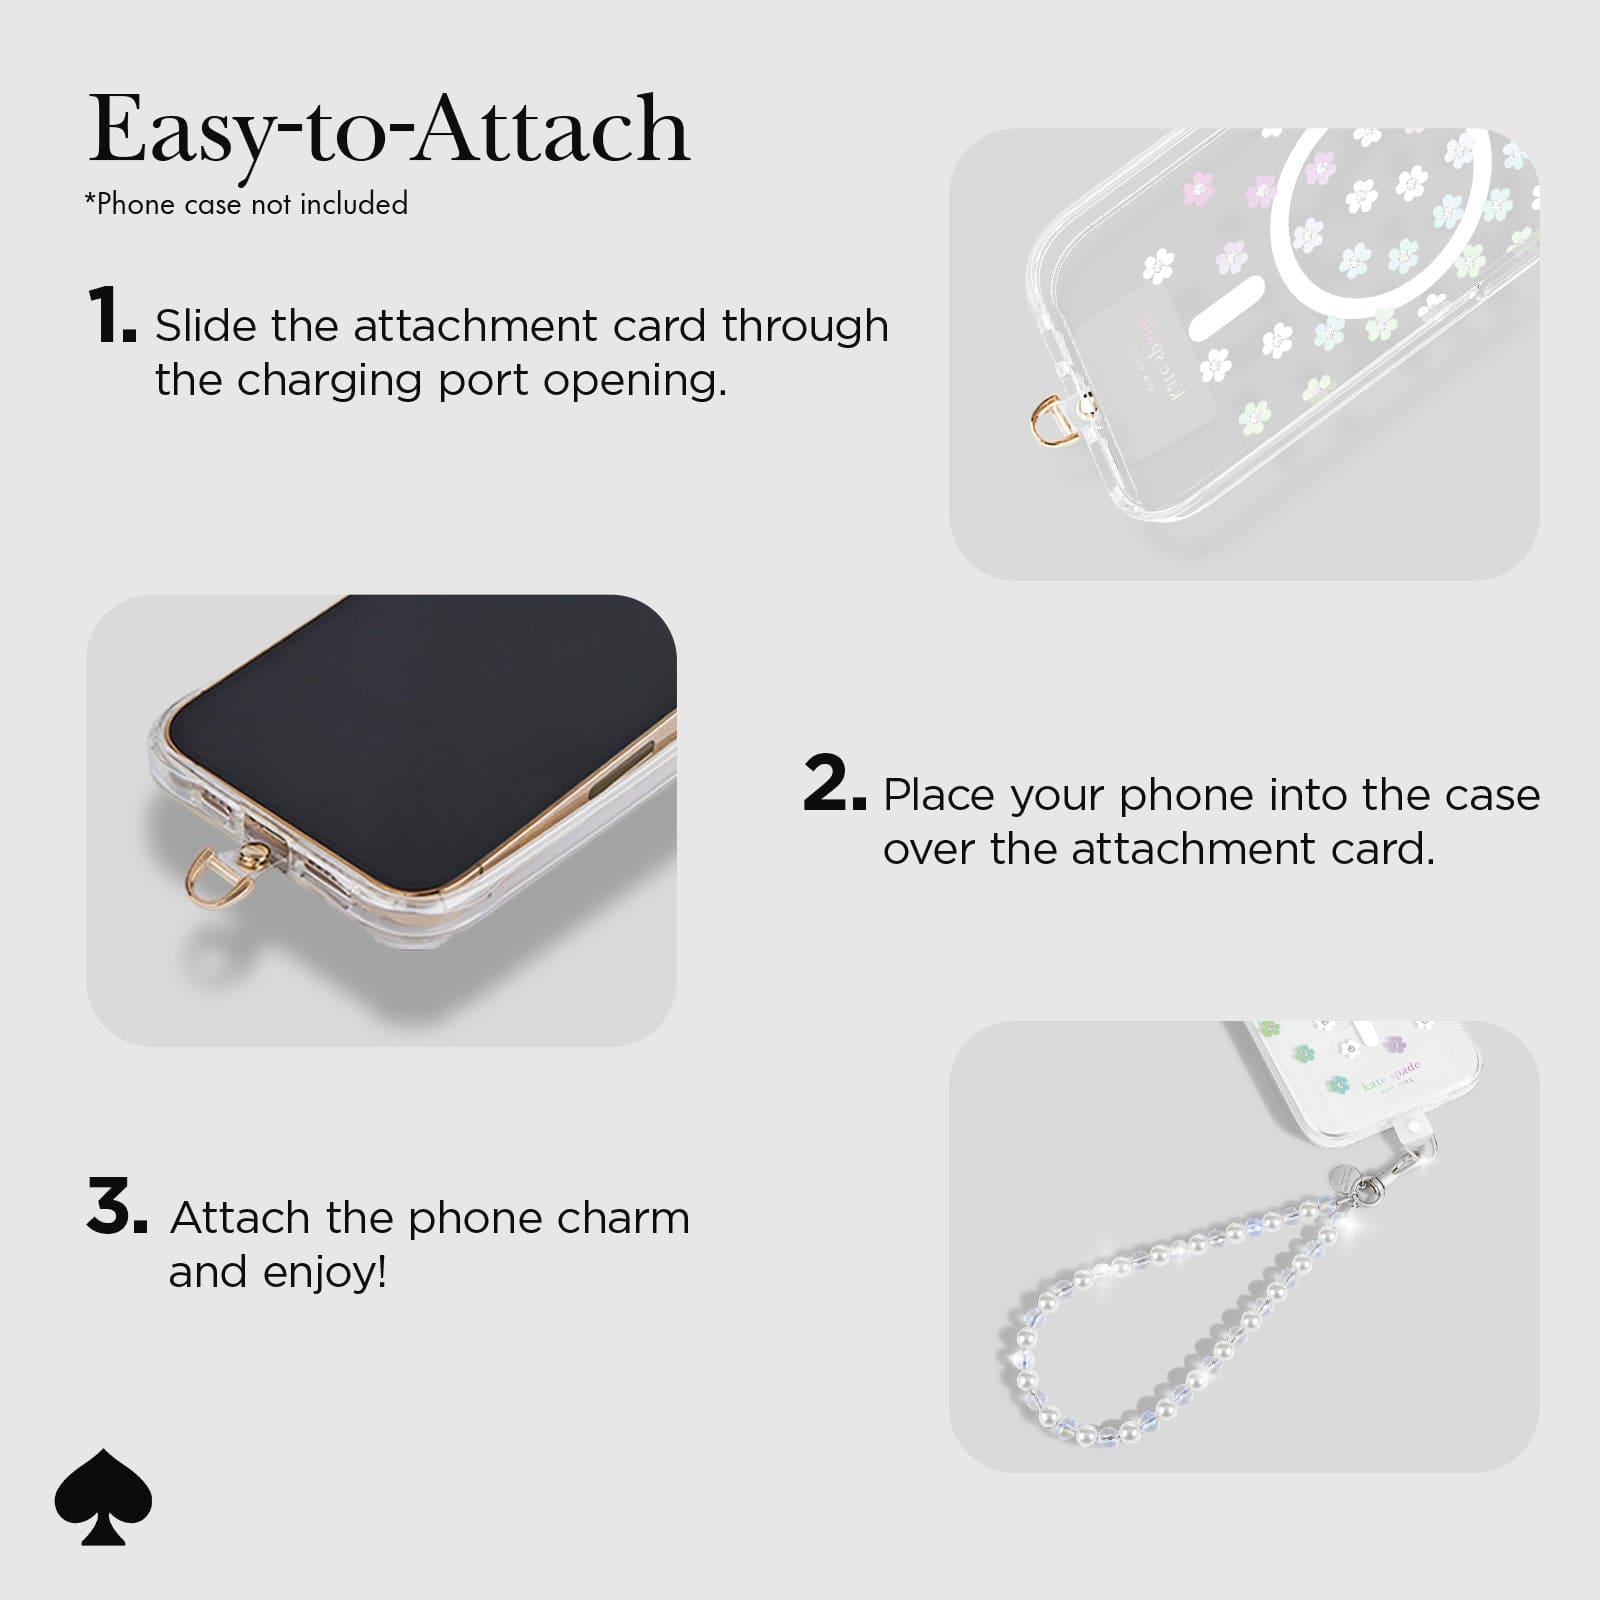 EASY-TO-ATTACH PHONE CASE NOT INCLUDED. 1. SLIDE THE ATTACHMENT CARD THROUGH THE CHARGING PORT OPENING/ 2 PLACE YOUR PHONE INTO THE CASE OVER THE ATTACHMENT CARD. 3 ATTACH THE PHONE CHARM AND ENJOY!